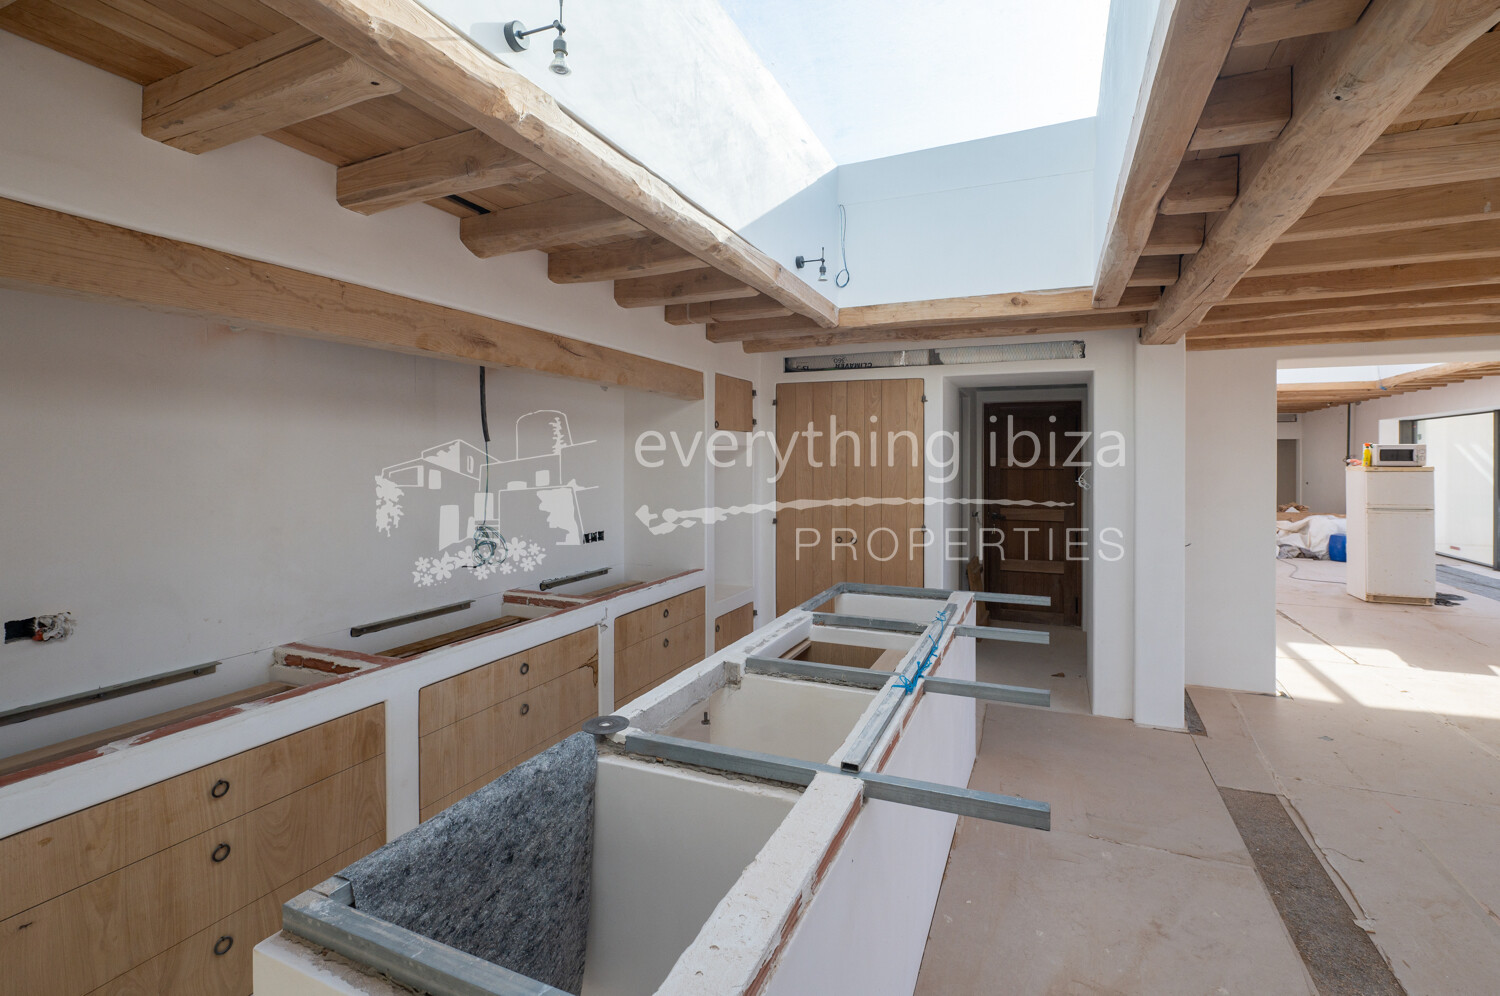 Stunning New Build Villa Designed by Blakstad,ref 1659, for sale in Ibiza by everything ibiza Properties